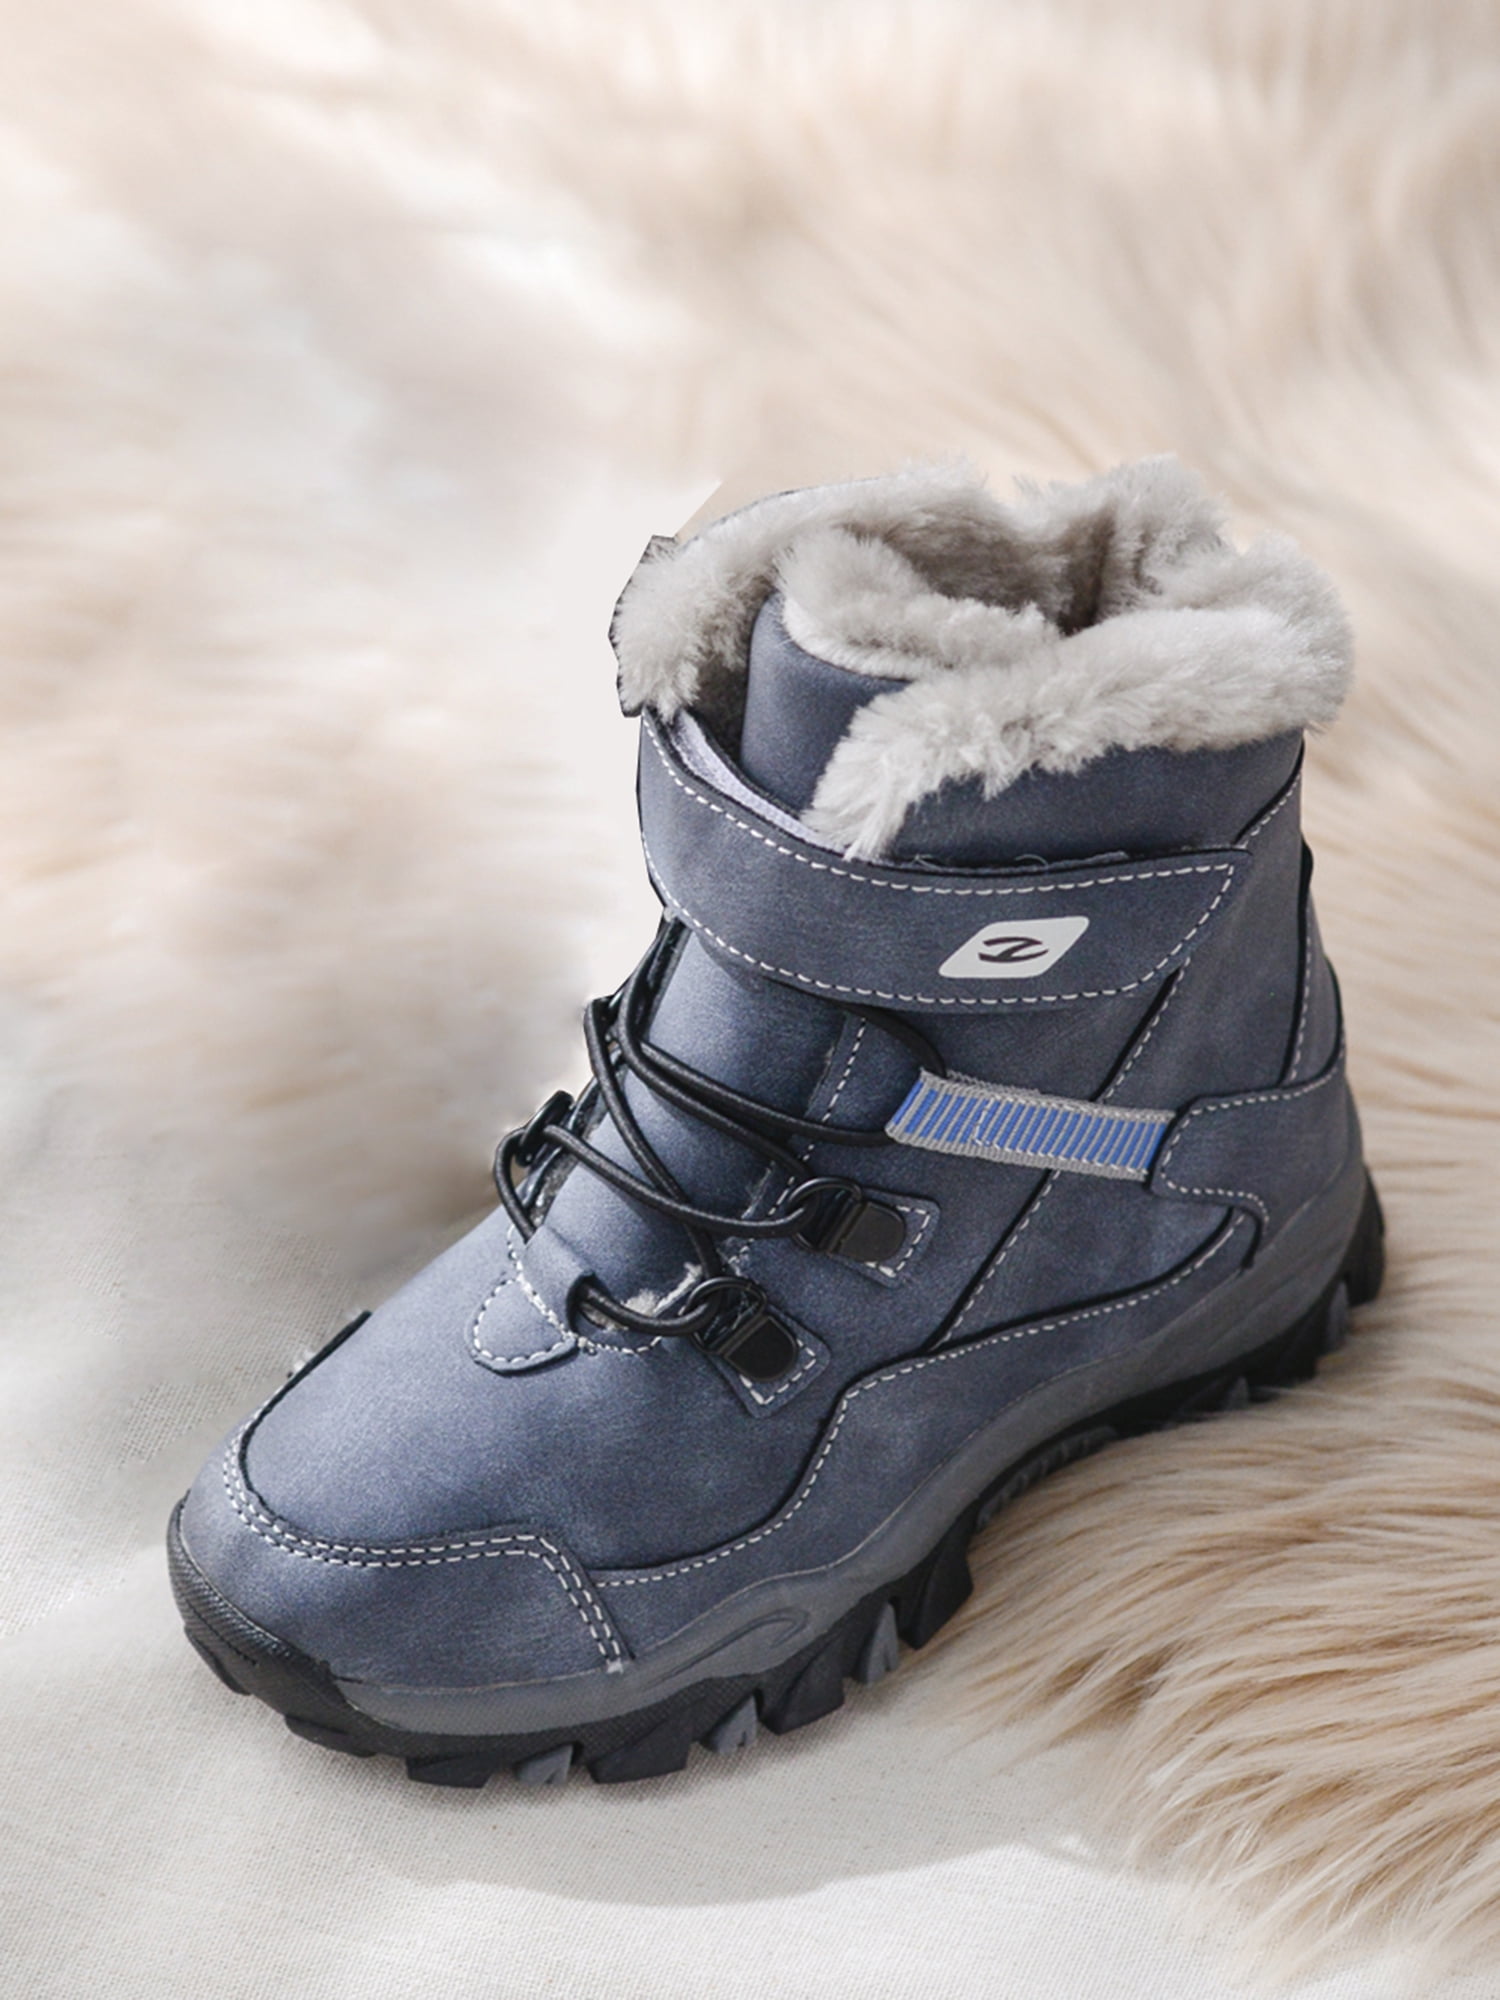 Big Child Kids Boys Girl Snow Boots Winter Warm Fur Ankle Boots Outdoor Shoes 